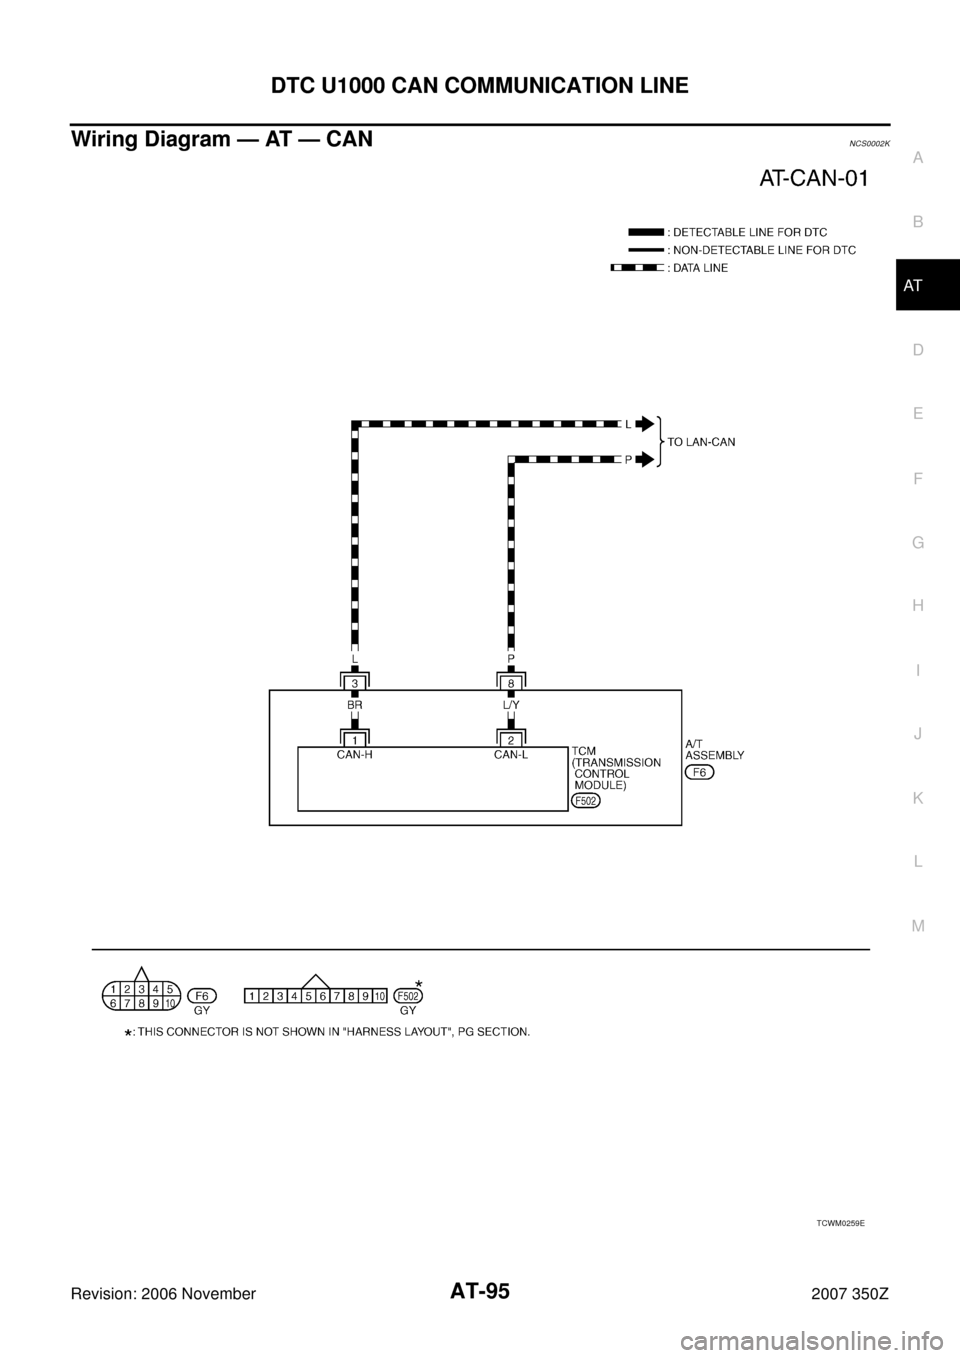 NISSAN 350Z 2007 Z33 Automatic Transmission Owners Manual DTC U1000 CAN COMMUNICATION LINE
AT-95
D
E
F
G
H
I
J
K
L
MA
B
AT
Revision: 2006 November2007 350Z
Wiring Diagram — AT — CANNCS0002K
TCWM0259E 